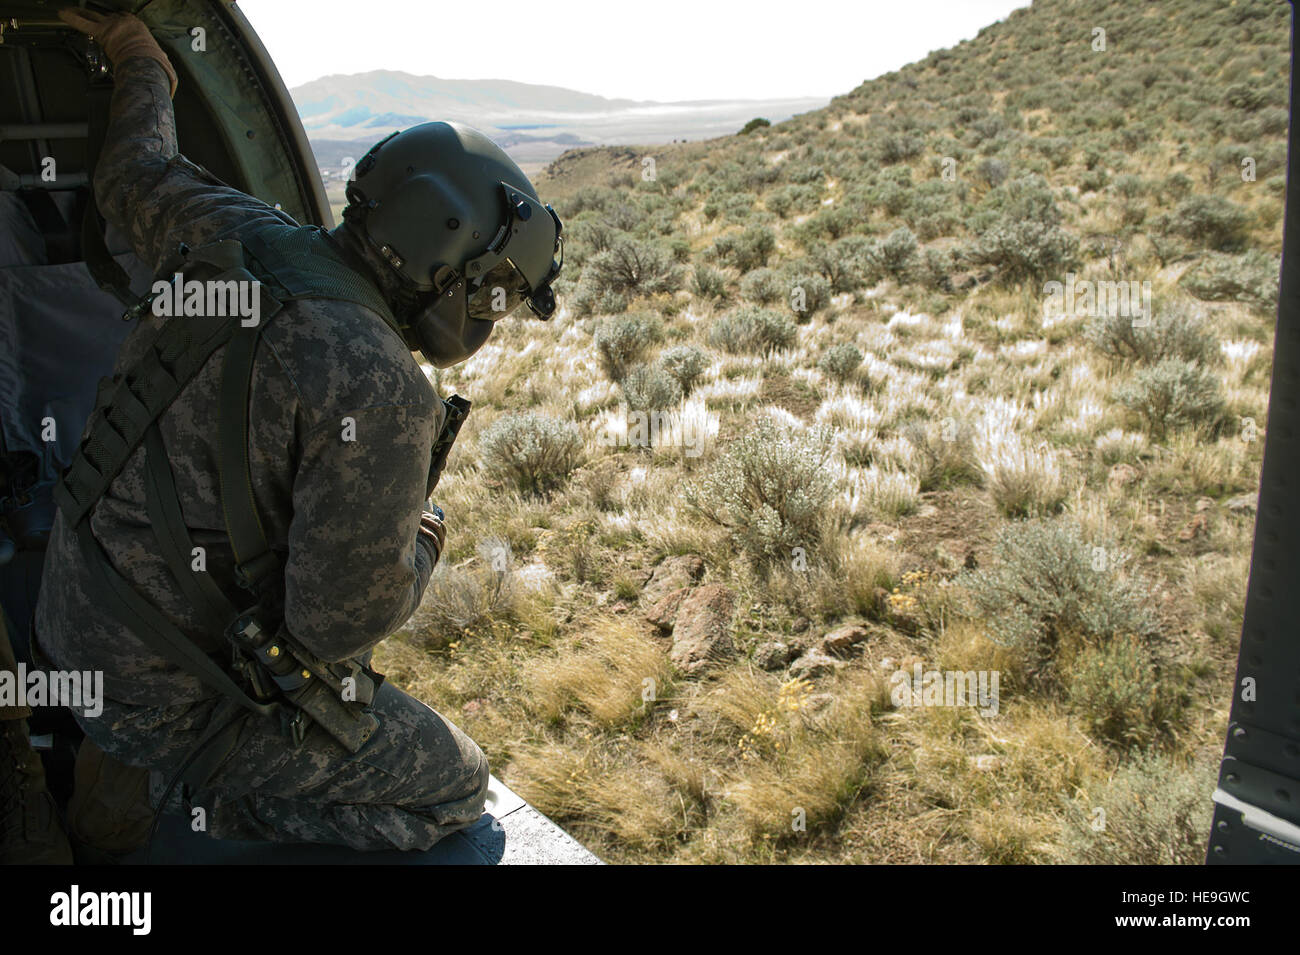 U.S. Army Sgt. Jason Townsen, a flight instructor from C Company 1-171 Medevac, Utah Army National Guard, West Jordan, Utah, participates in a search and rescue training exercise, a lost hiker, on Camp W.G. Williams, Riverton, Utah, on April 3, 2012. Stock Photo